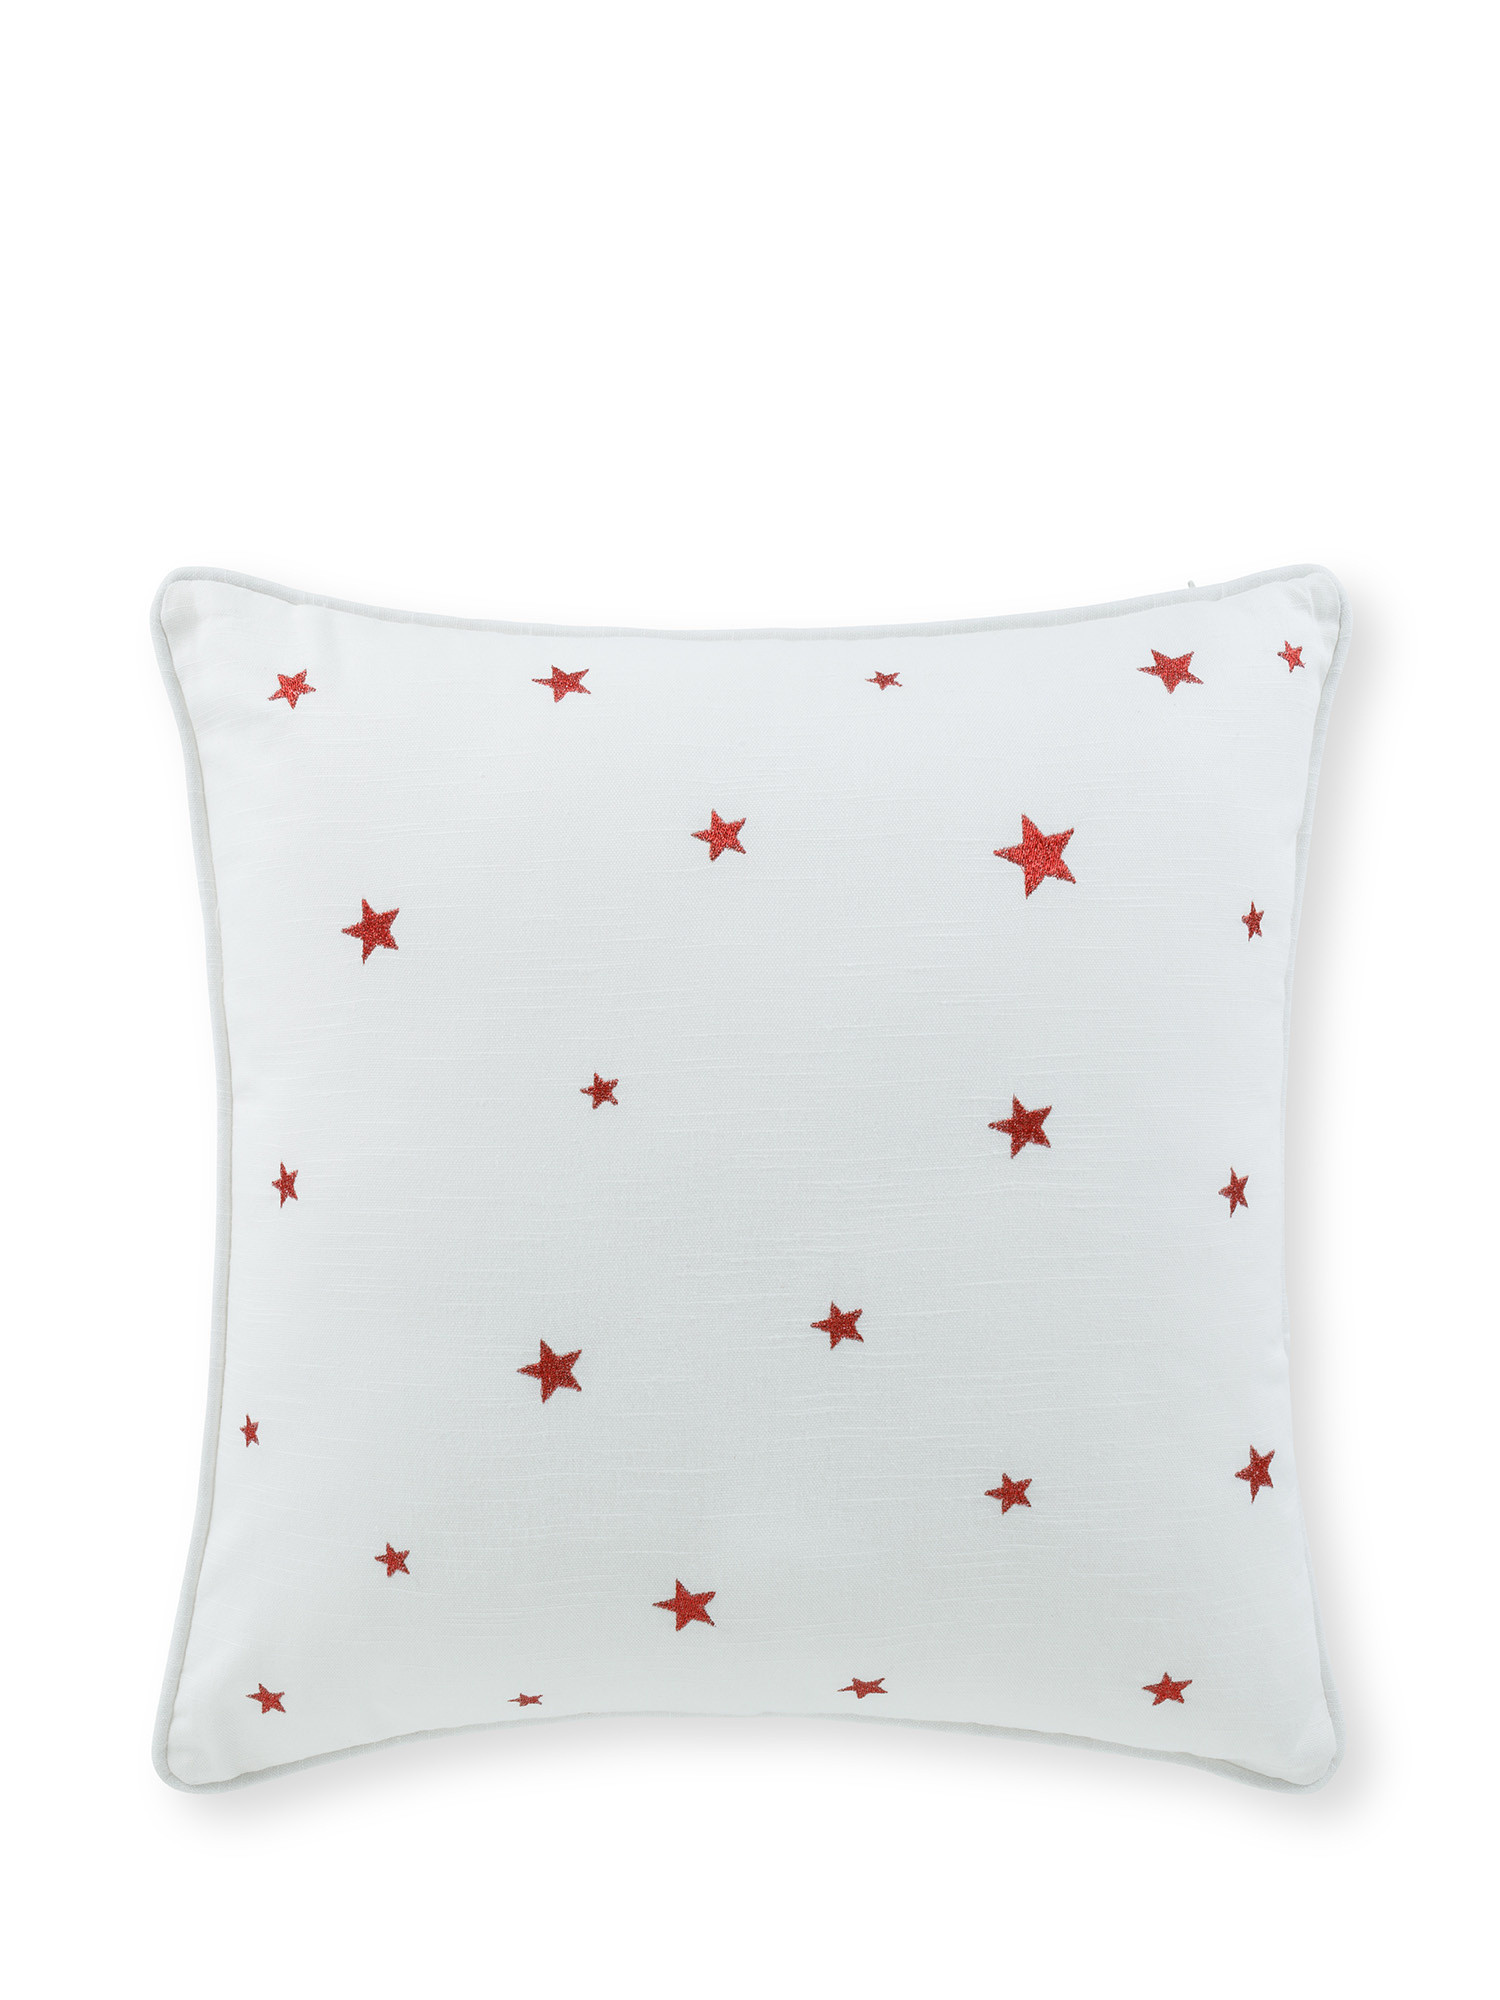 Cuscino in velluto con stelle ricamate in filo lurex 45x45 cm, Rosso, large image number 0